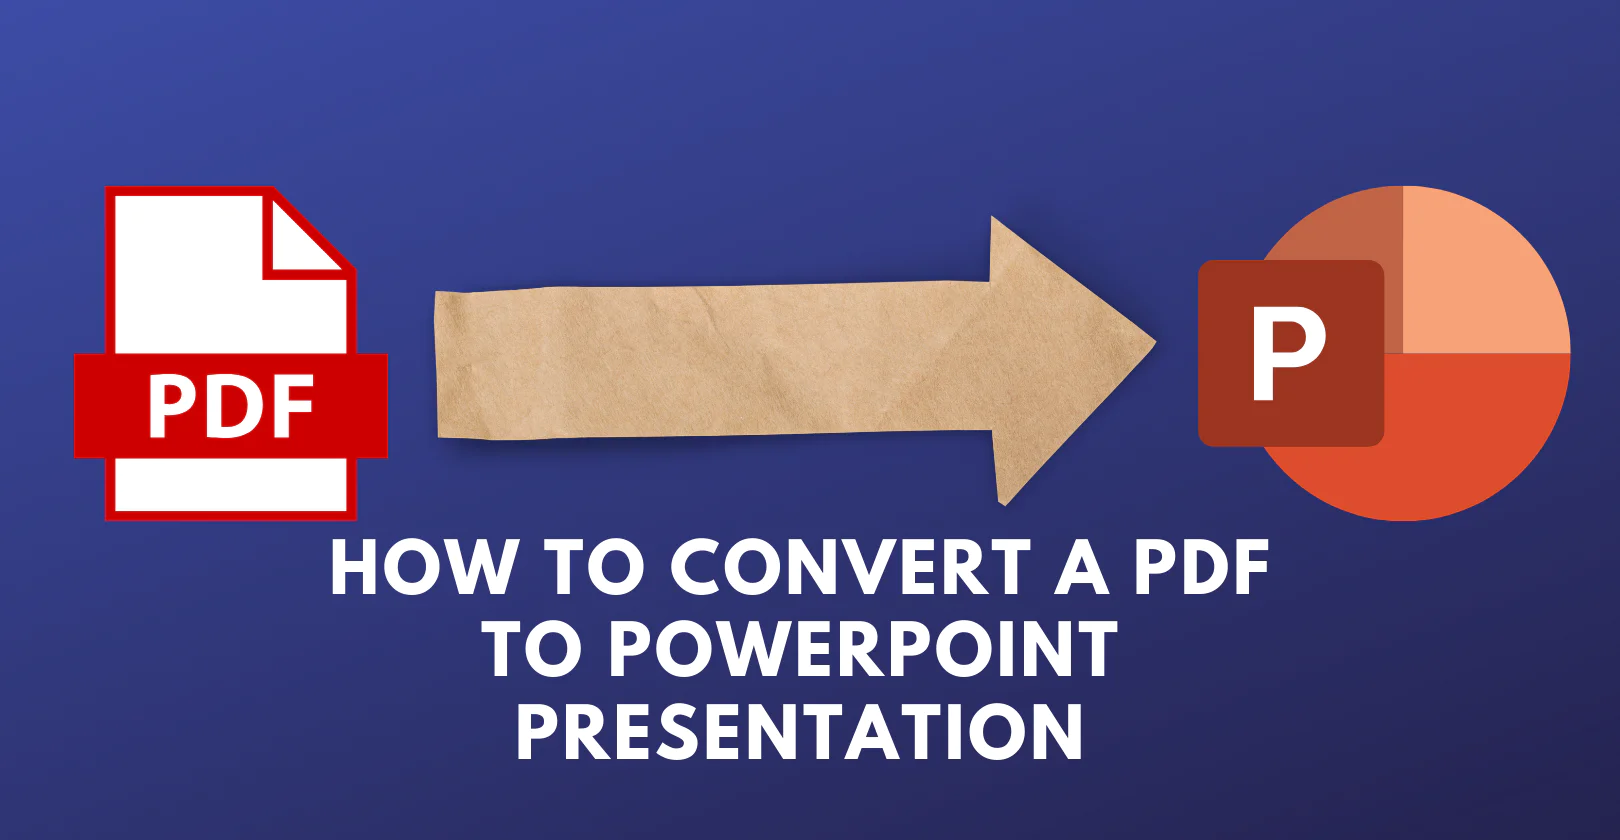 how to convert a pdf back to a powerpoint presentation